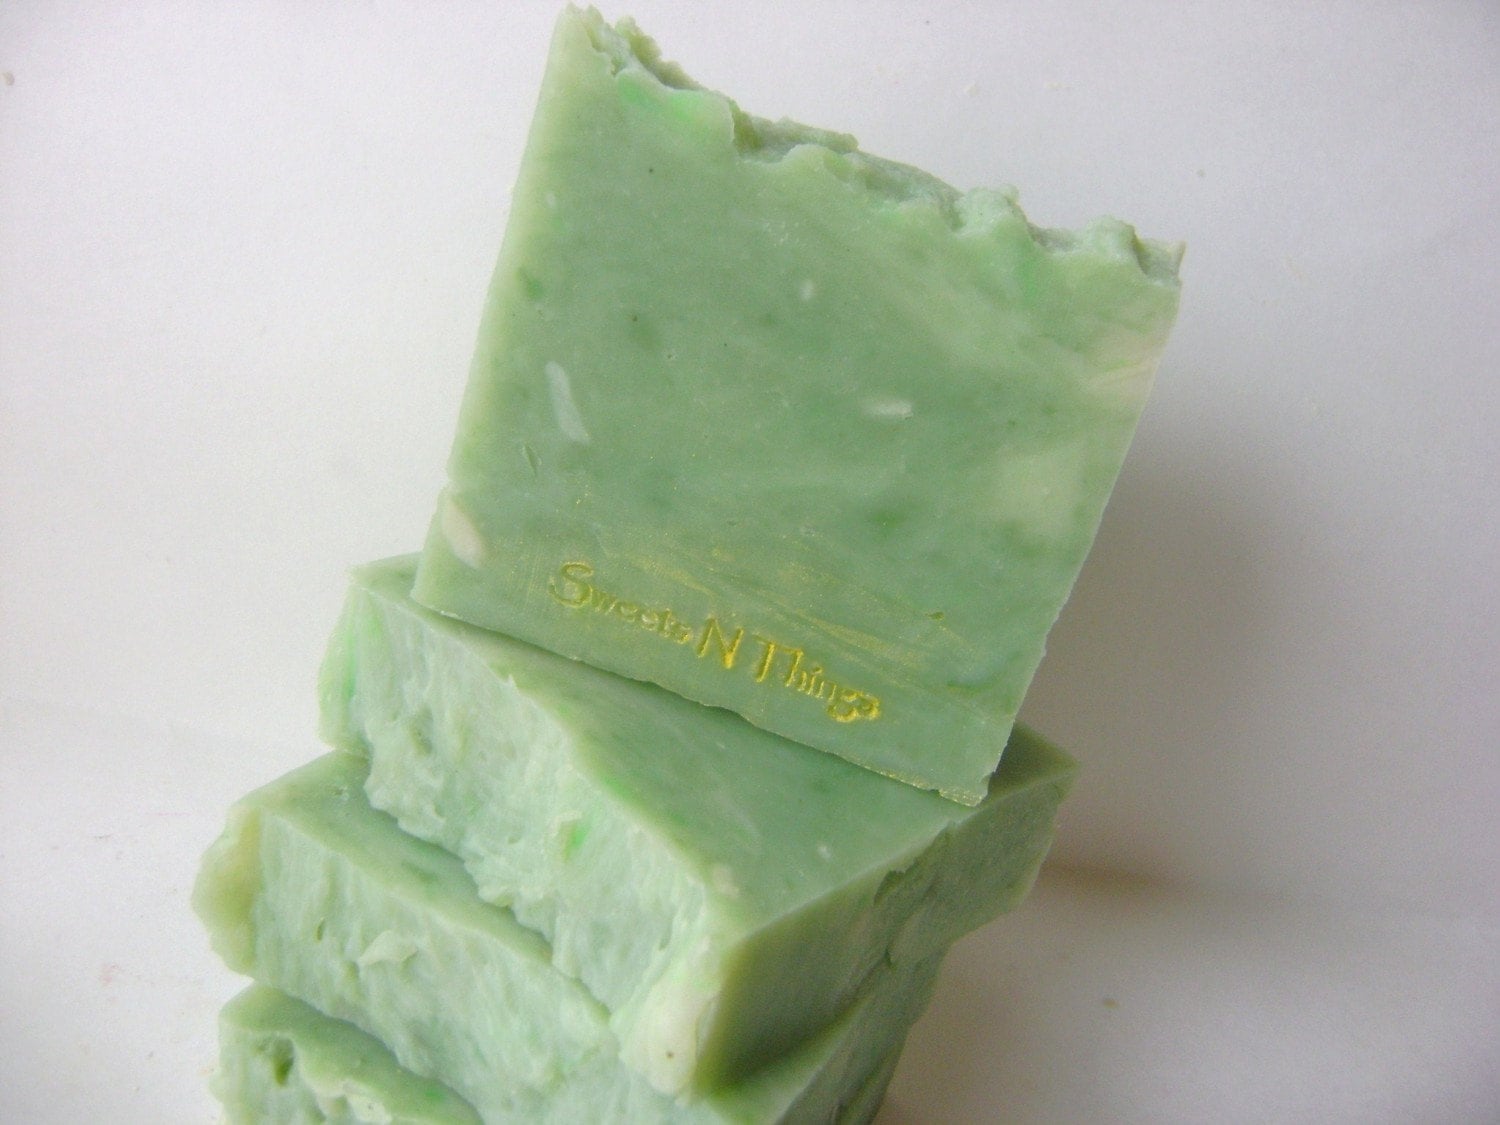 ON SALE 10% OFF The Finest Green, Handmade Vegan Hot Process Soap, "Herbal" Scent